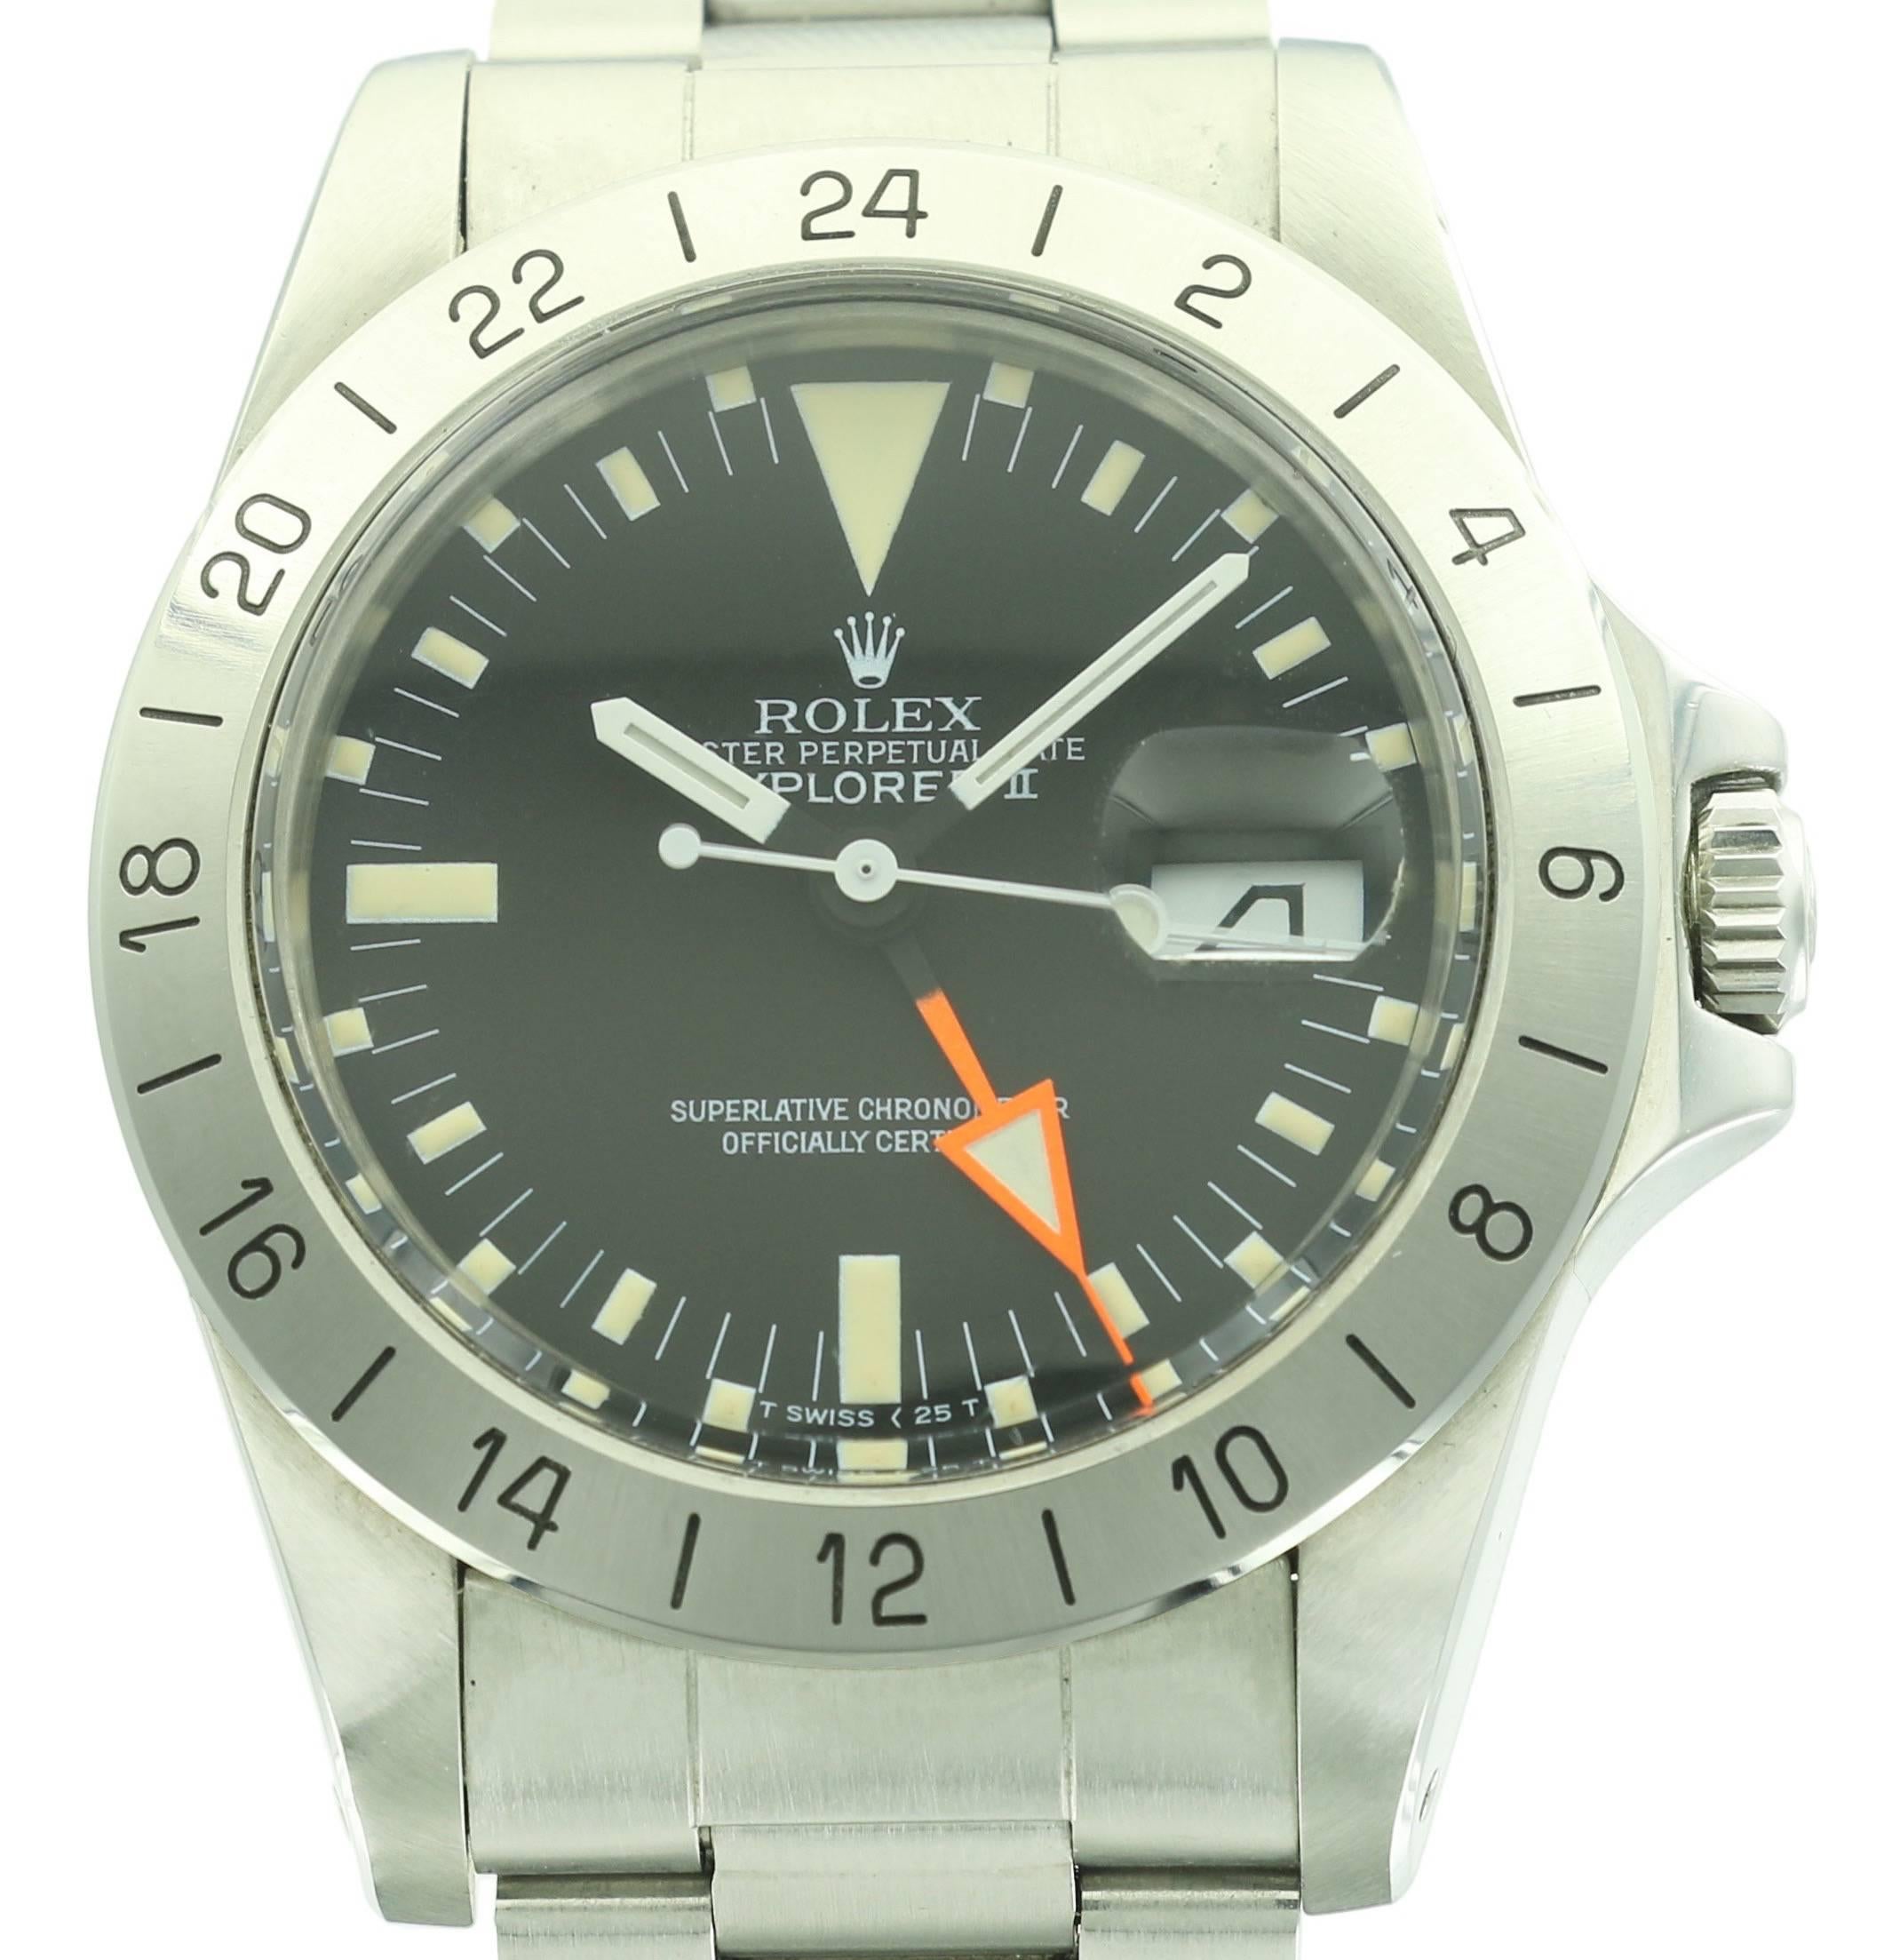 The Rolex Explorer is one of the more iconic, well known Rolex models of the past 40 years. This particular model, a reference 1655, has a number of nicknames, including the McQueen, Freccione or just Orange Hand Explorer. Whatever you call it, it's